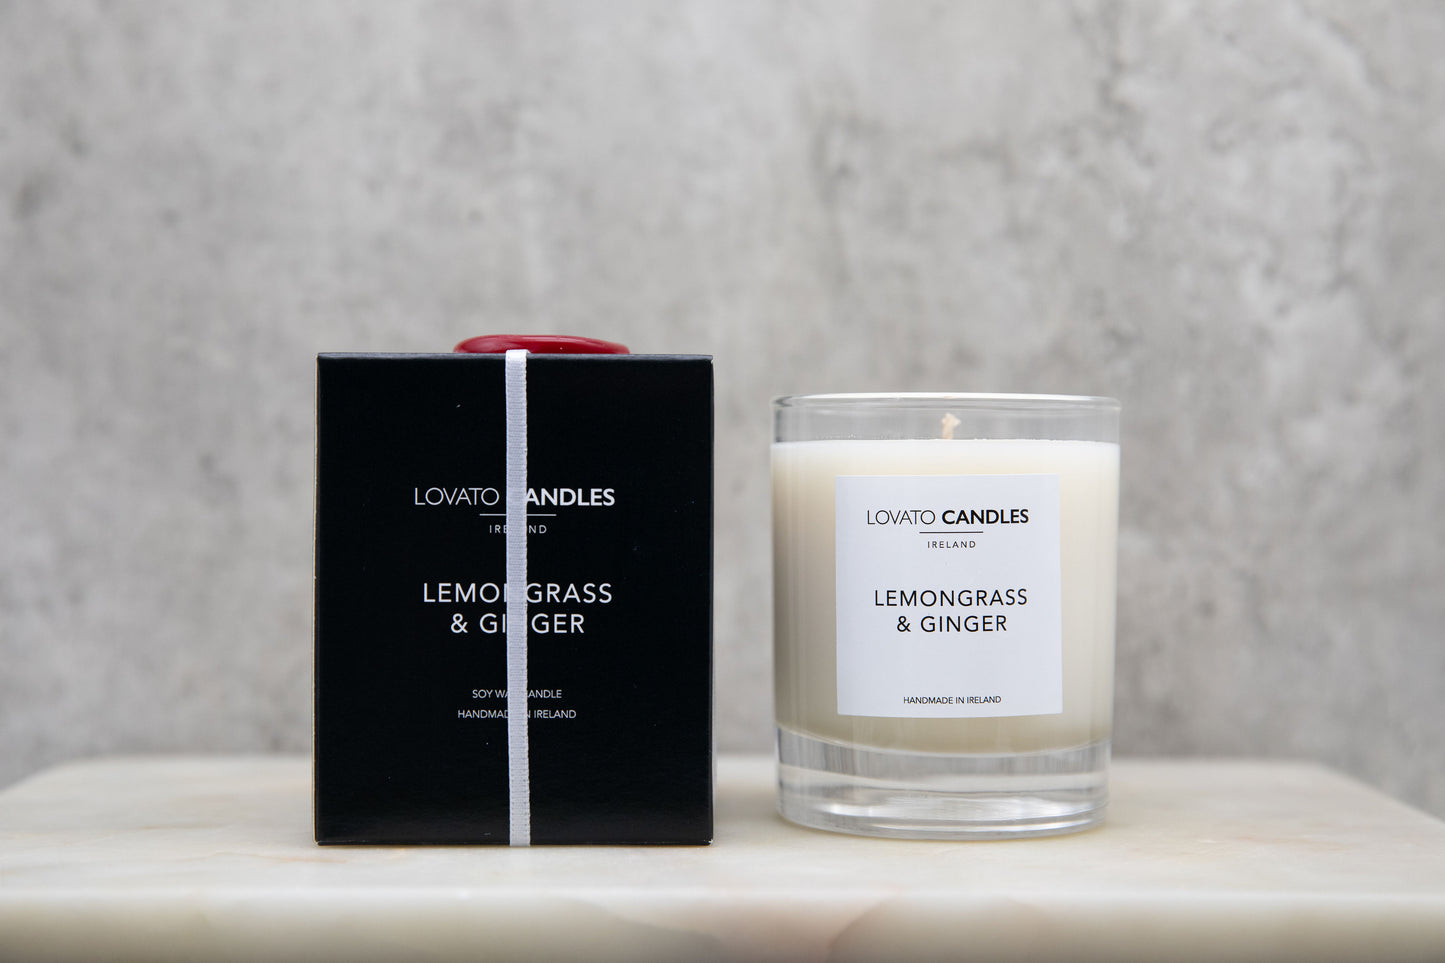 Clear Scented Candle with Luxury Black Box - Lemongrass & Ginger